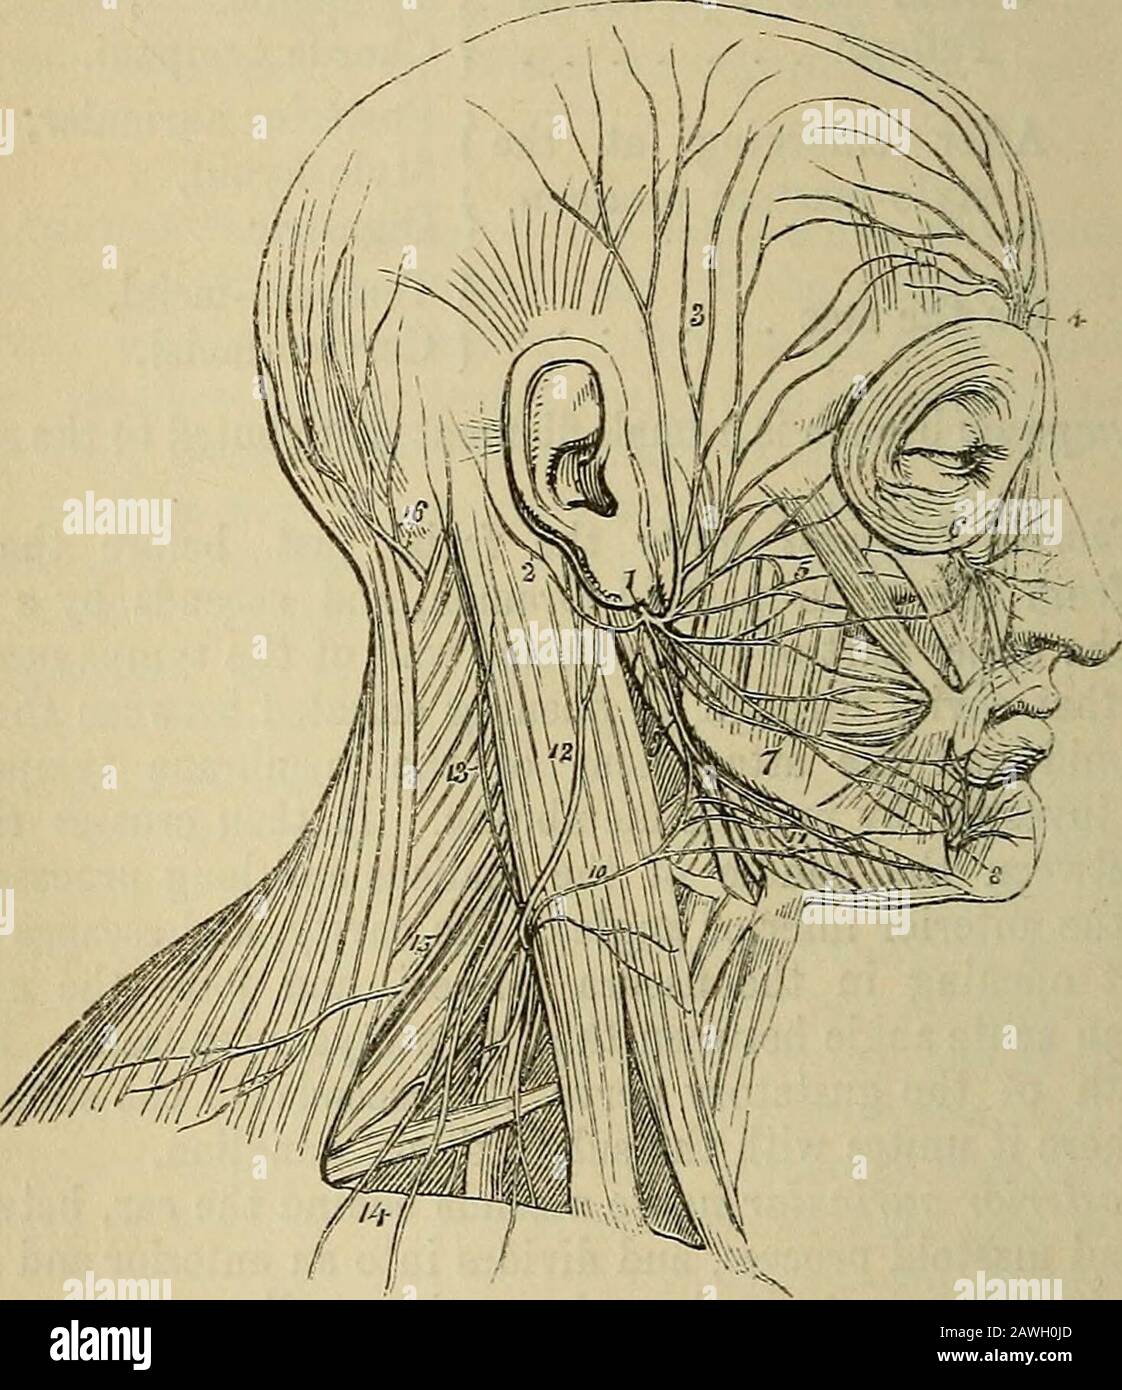 The anatomist's vade mecum : a system of human anatomy . ylo-hyoicl branch is distributed to the stylo-hyoid muscle,and communicates with the carotid plexus of the sympathetic. The Digastric branch supplies the posterior belly of the digastricusmuscle, and communicates with the glosso-pharyngeal and pneumo-gastric nerve. The Temporo-facial gives off a number of branches which are dis-tributed over the temple and upper half of the face, supplying themuscles of this region, and communicating with the branches of theauriculo-temporal, subcutaneus malae, lachrymal, and supra-orbital 448 FACIAL NER Stock Photo